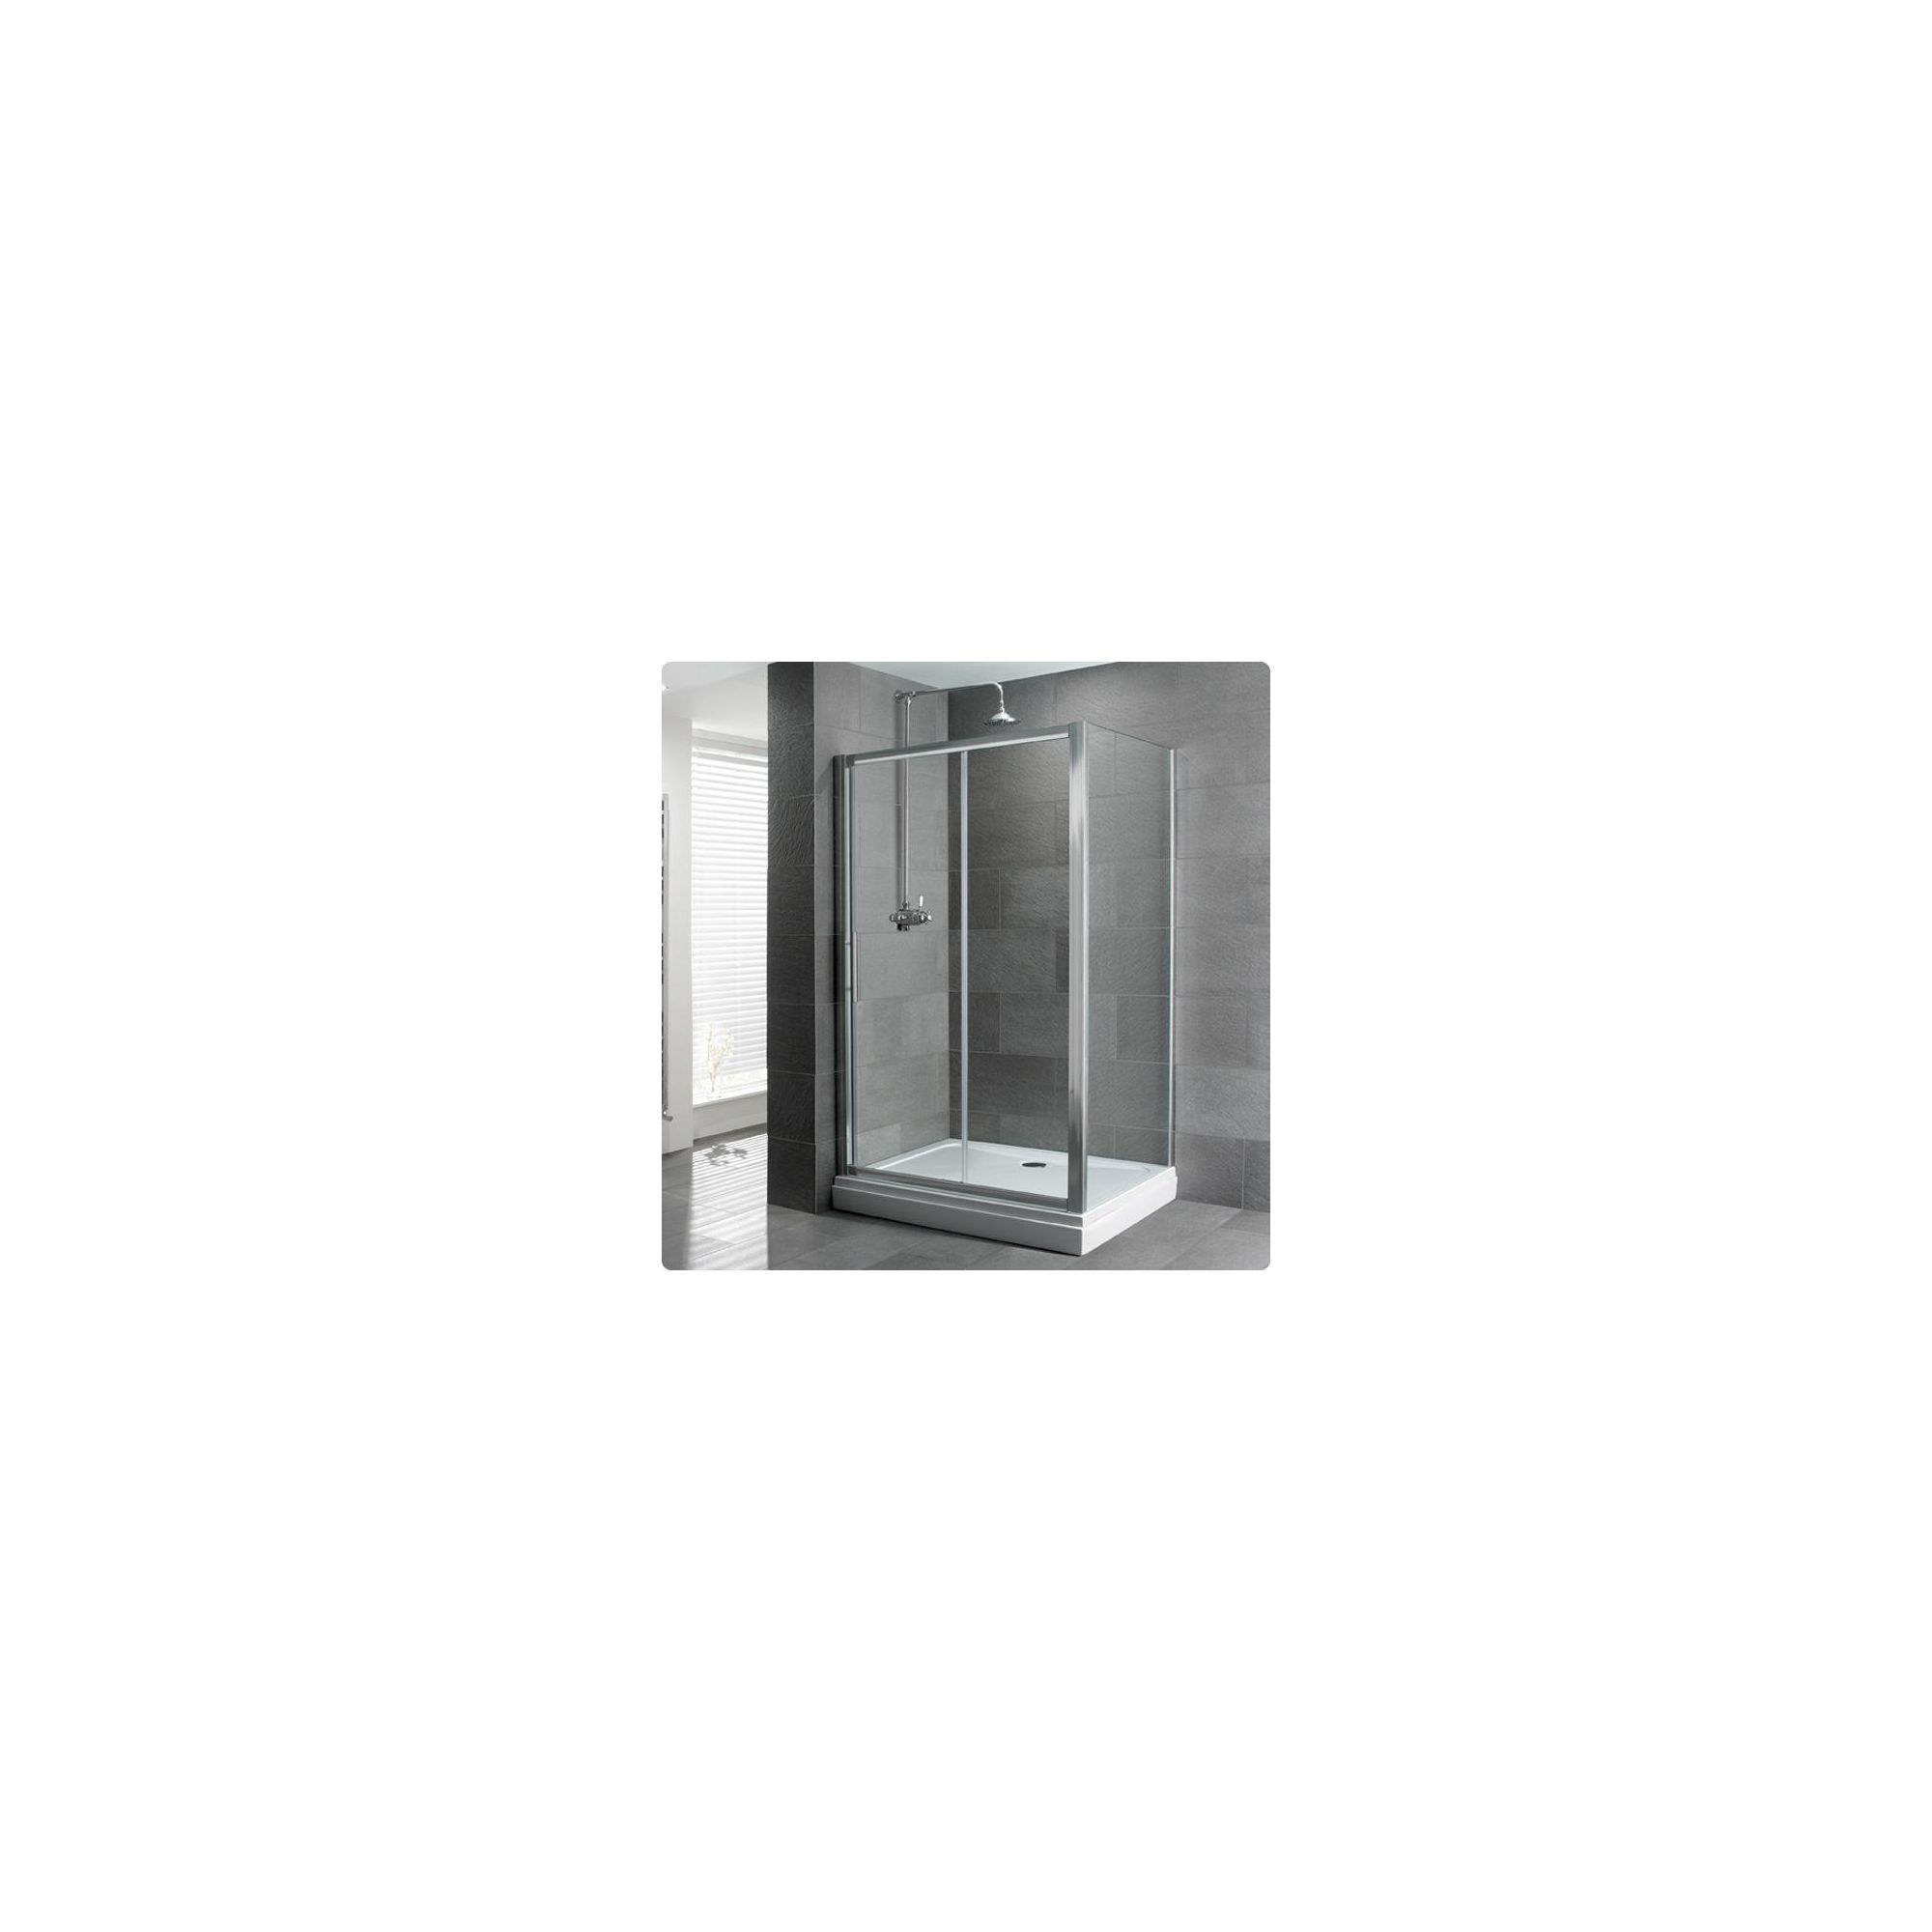 Duchy Select Silver Single Sliding Door Shower Enclosure, 1000mm x 700mm, Standard Tray, 6mm Glass at Tescos Direct